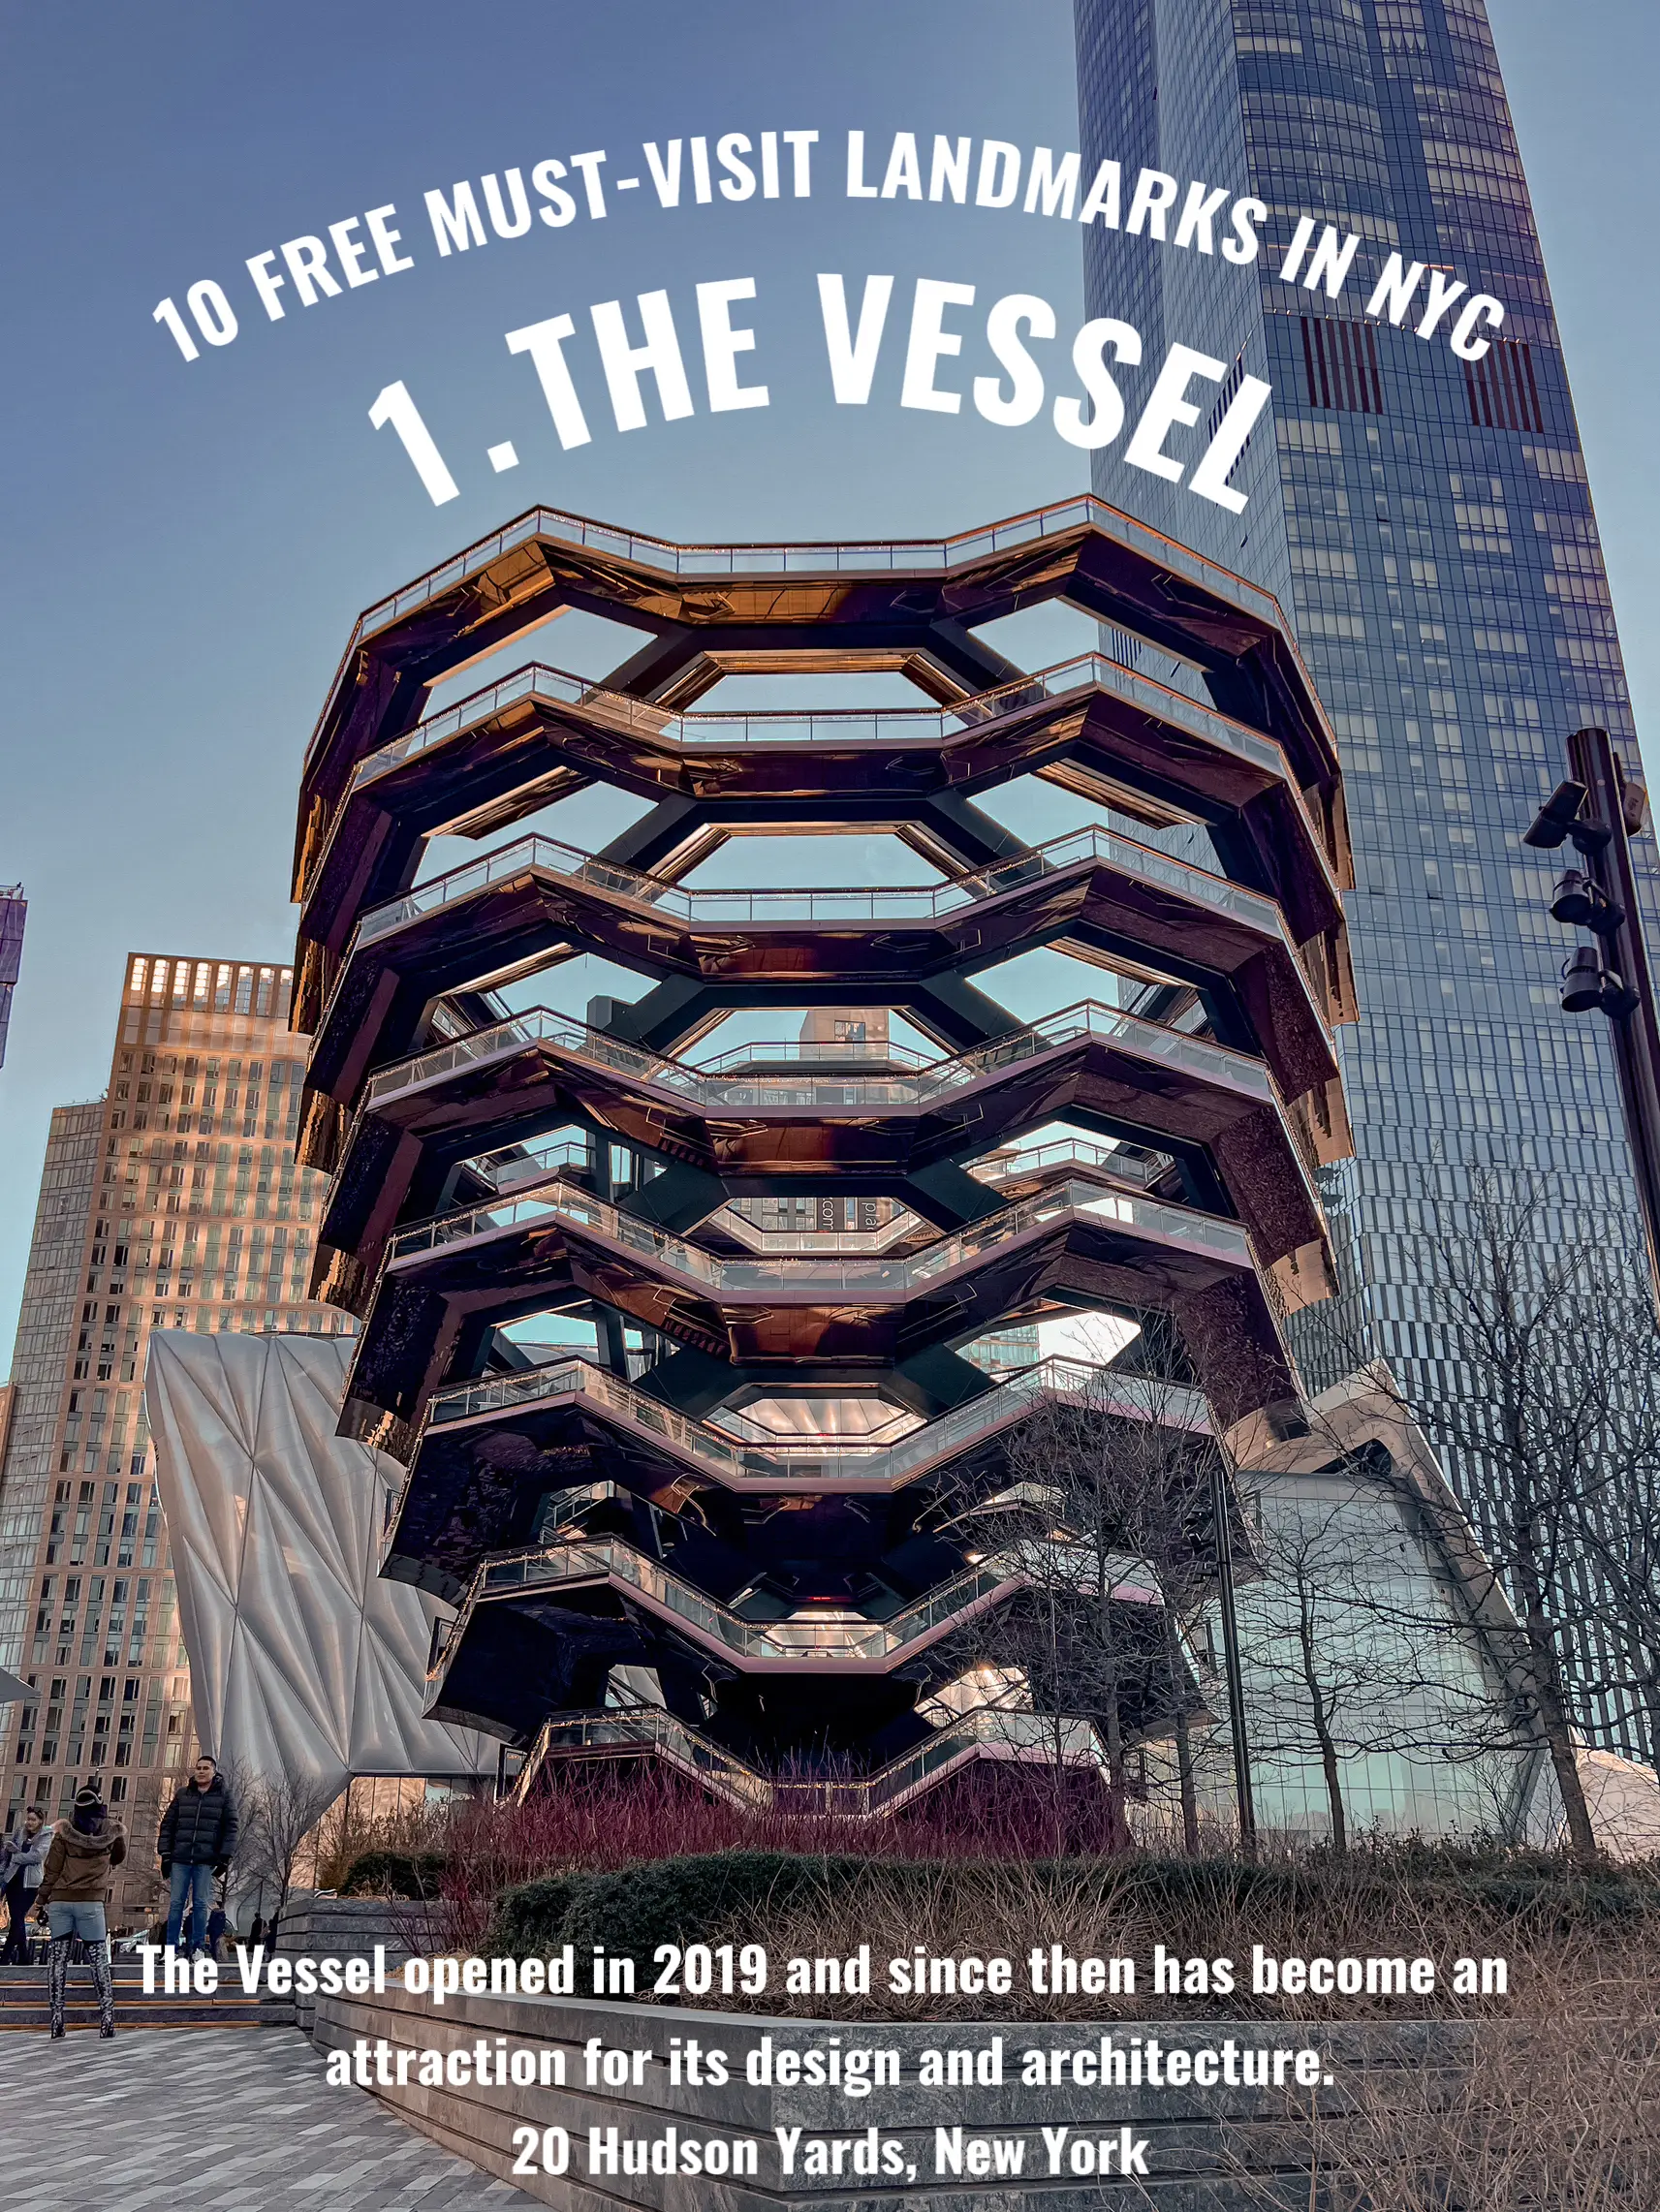  The Vessel is a large structure with a dome on top. It is located in New York and has become an attraction